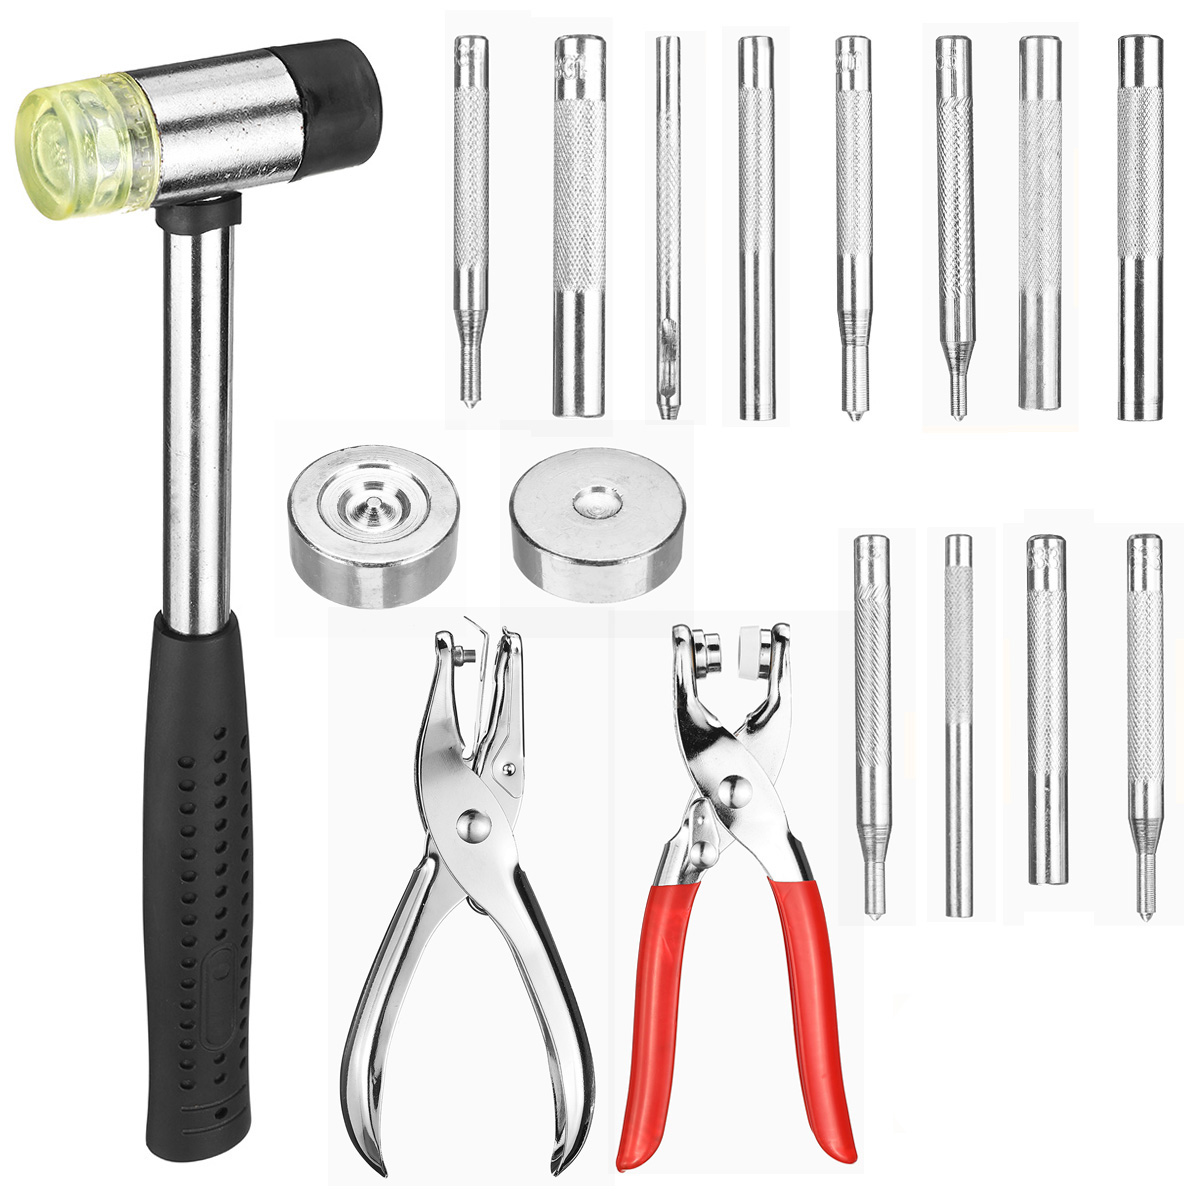 Button-Press-Tools-Buckle-Punch-Snap-Fasteners-Stick-Hammer-Studs-Fixing-Kit-1636339-1